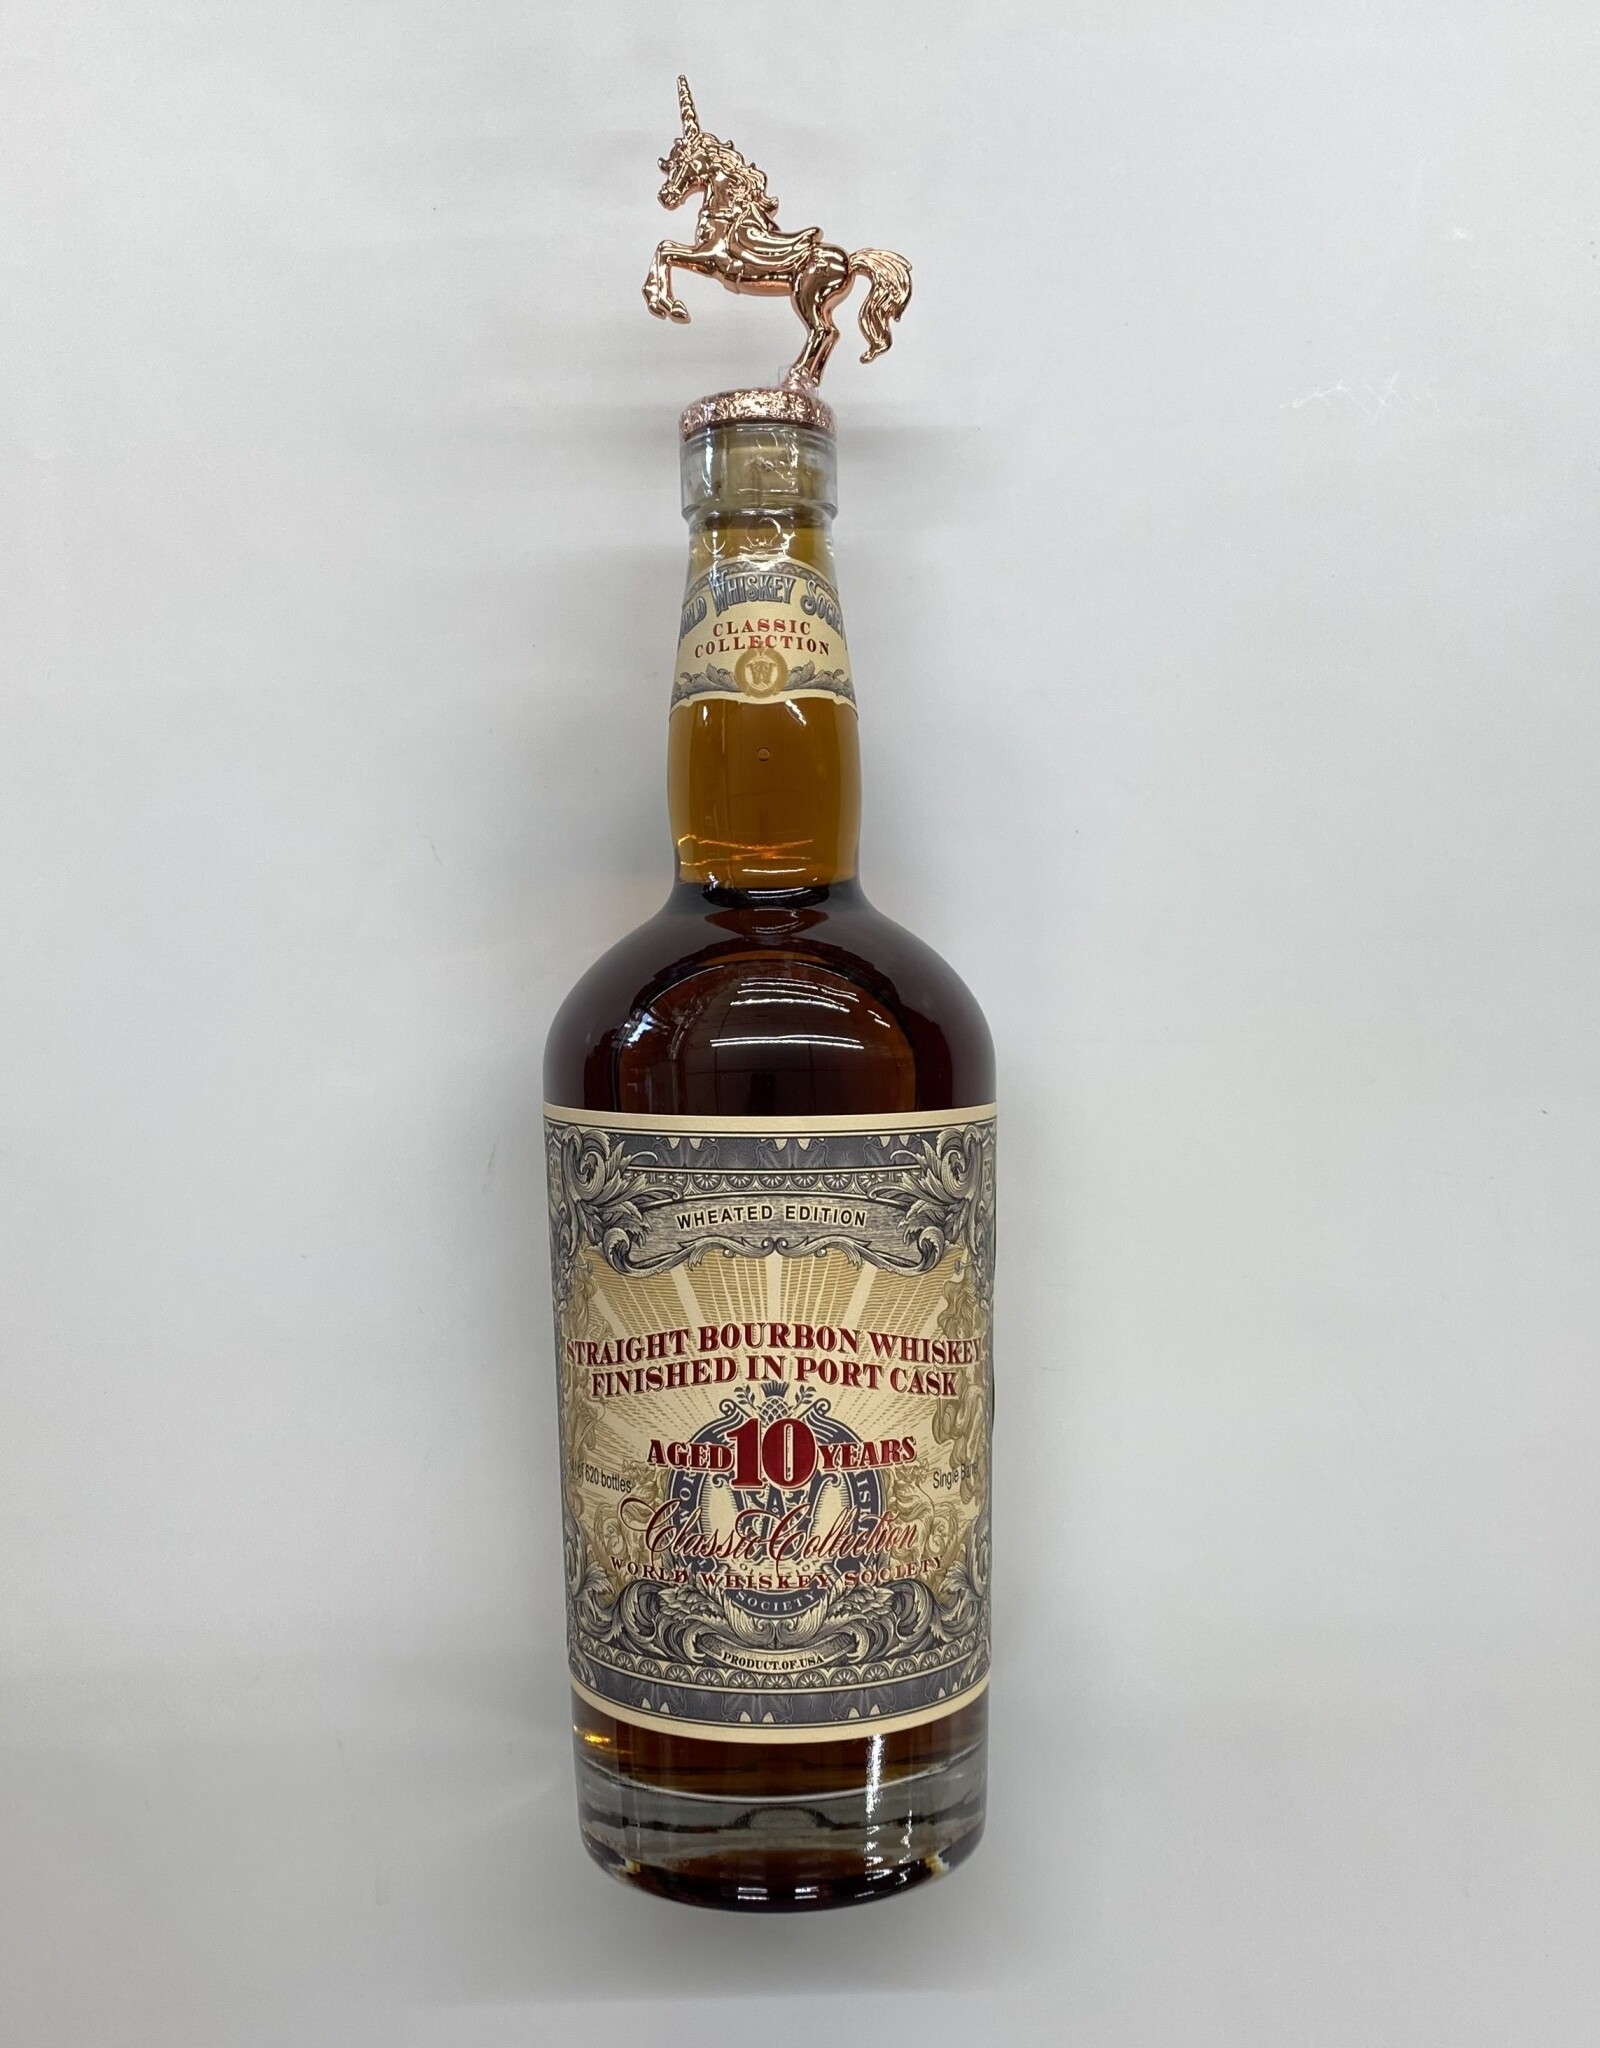 World Whiskey Society Wheated Edition Aged 10 Years